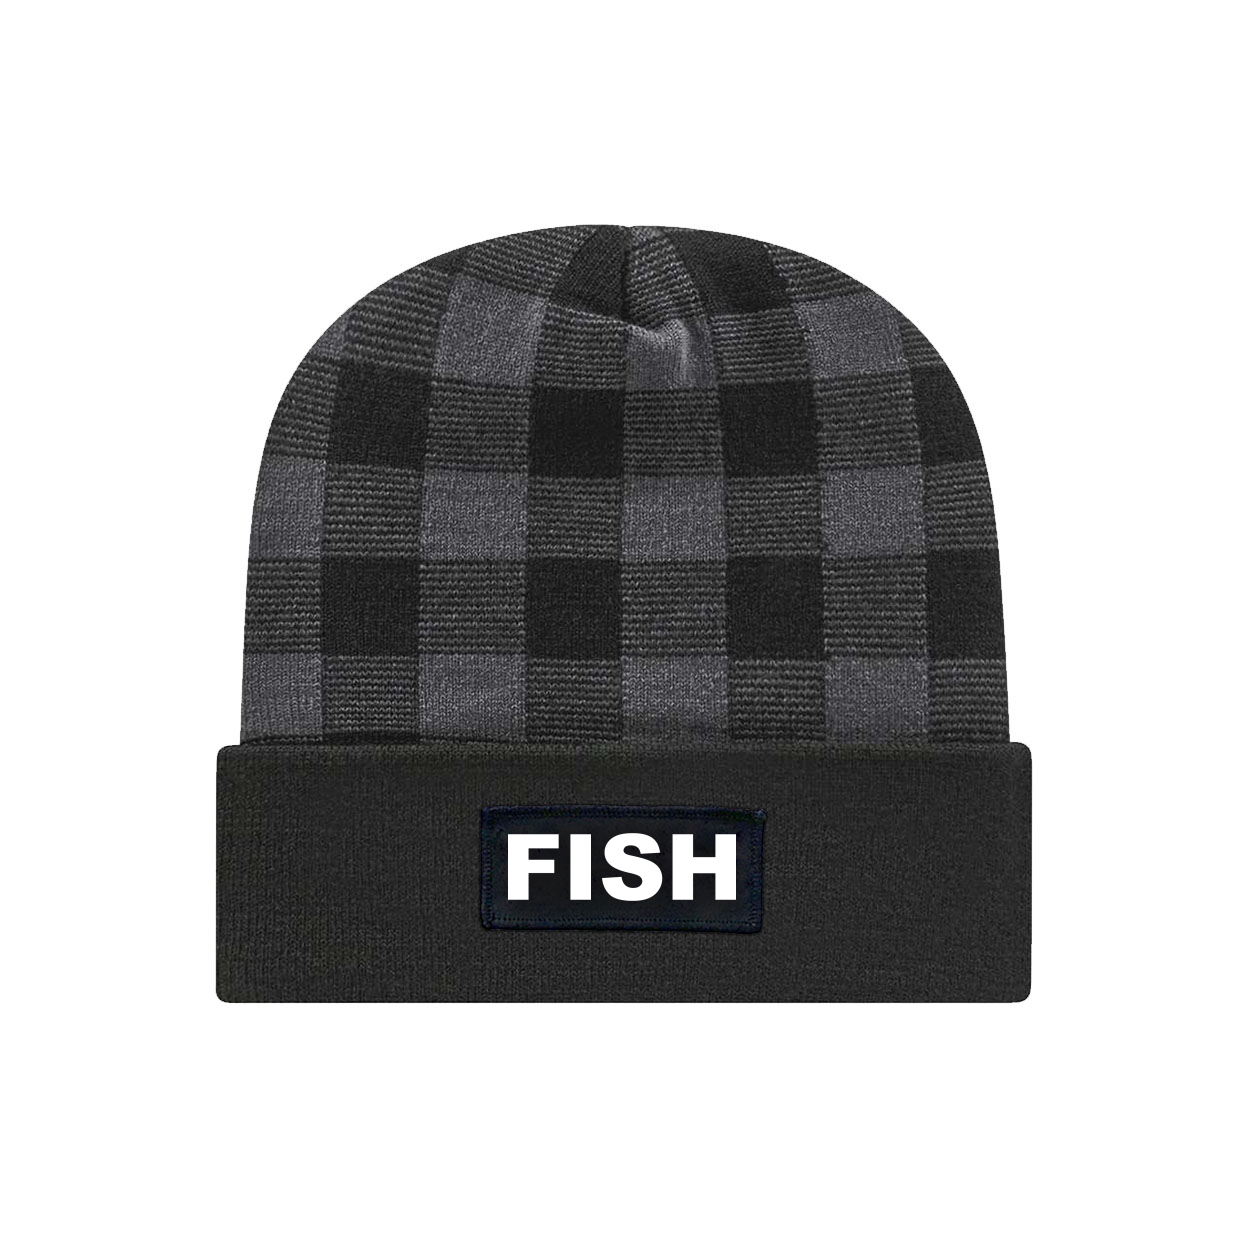 Fish Brand Logo Night Out Woven Patch Roll Up Plaid Beanie Black/Heather Gray